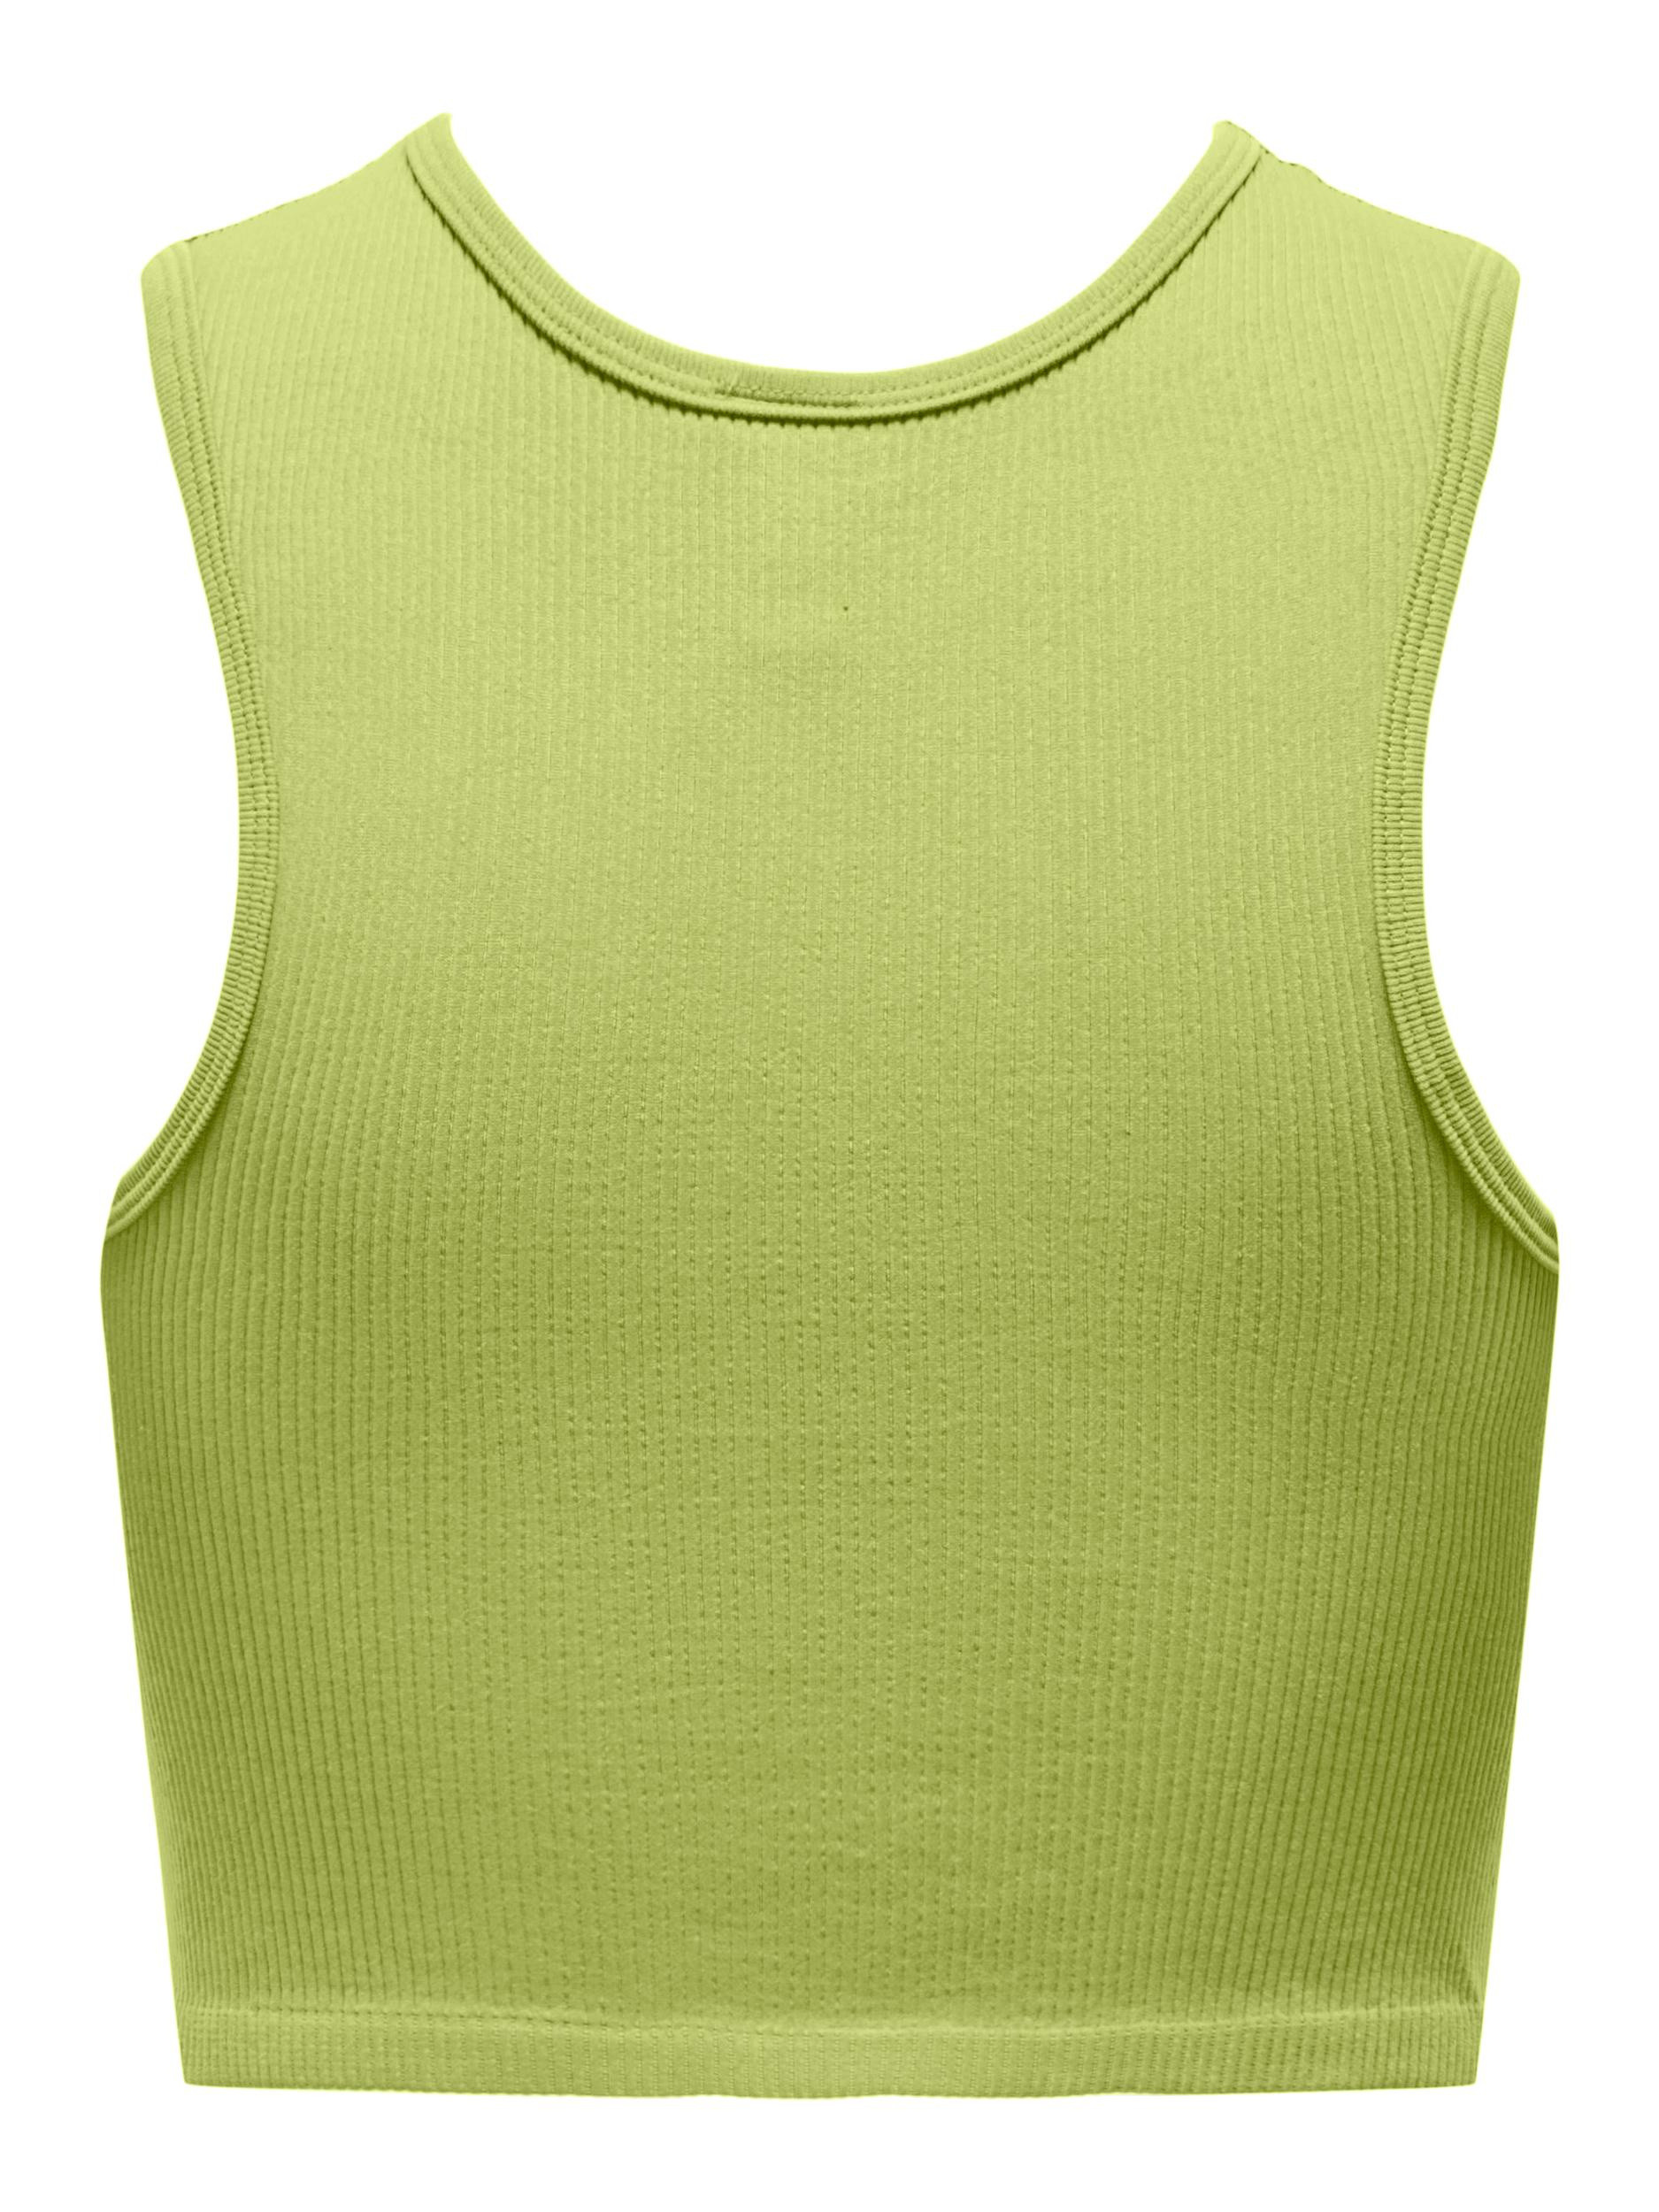 Only - Top stretch fit, Verde lime, large image number 1